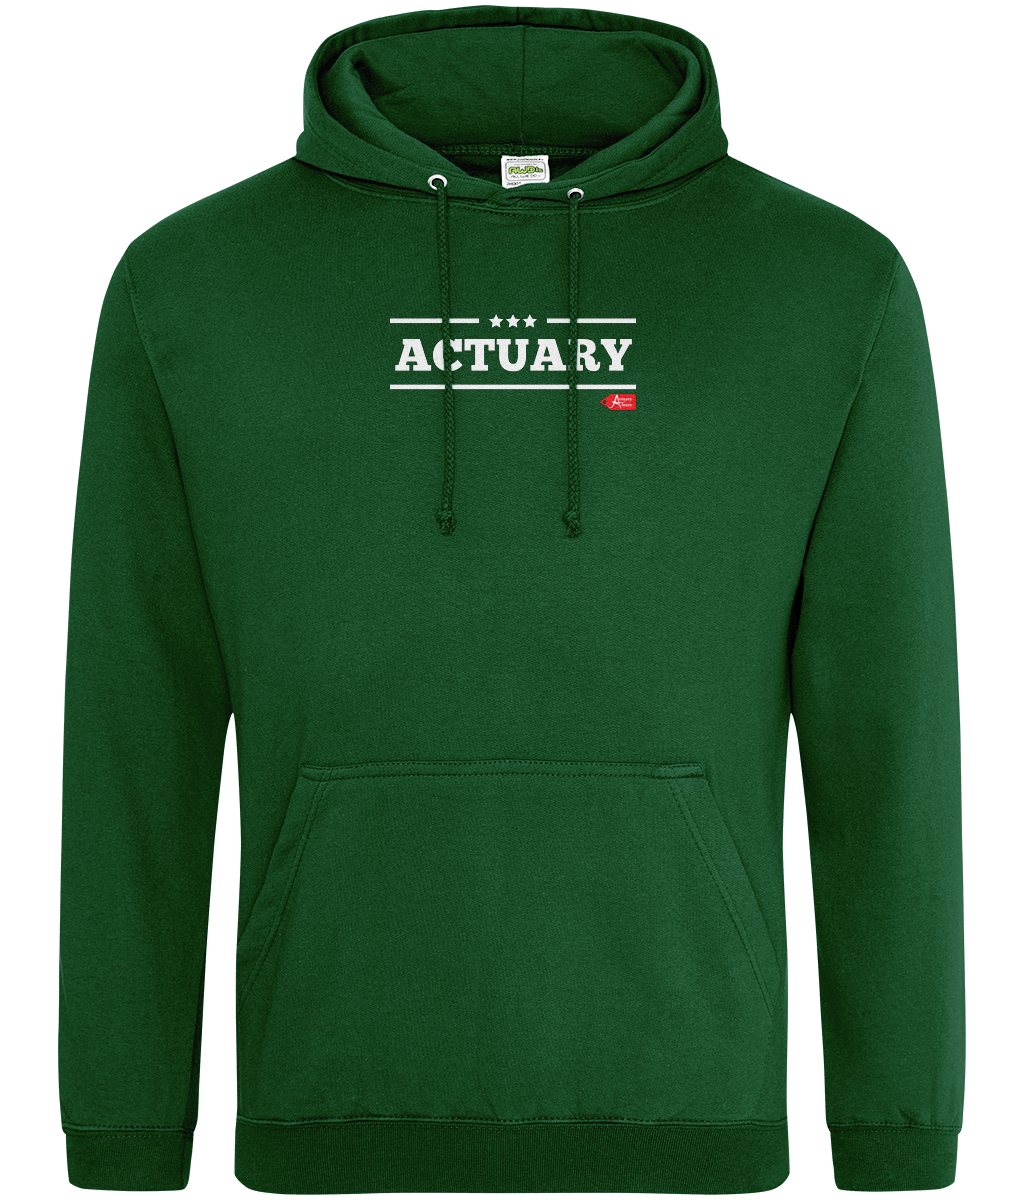 Actuary Bold Star Military College Hoodie (Black, Red, Blue, Green Variants)